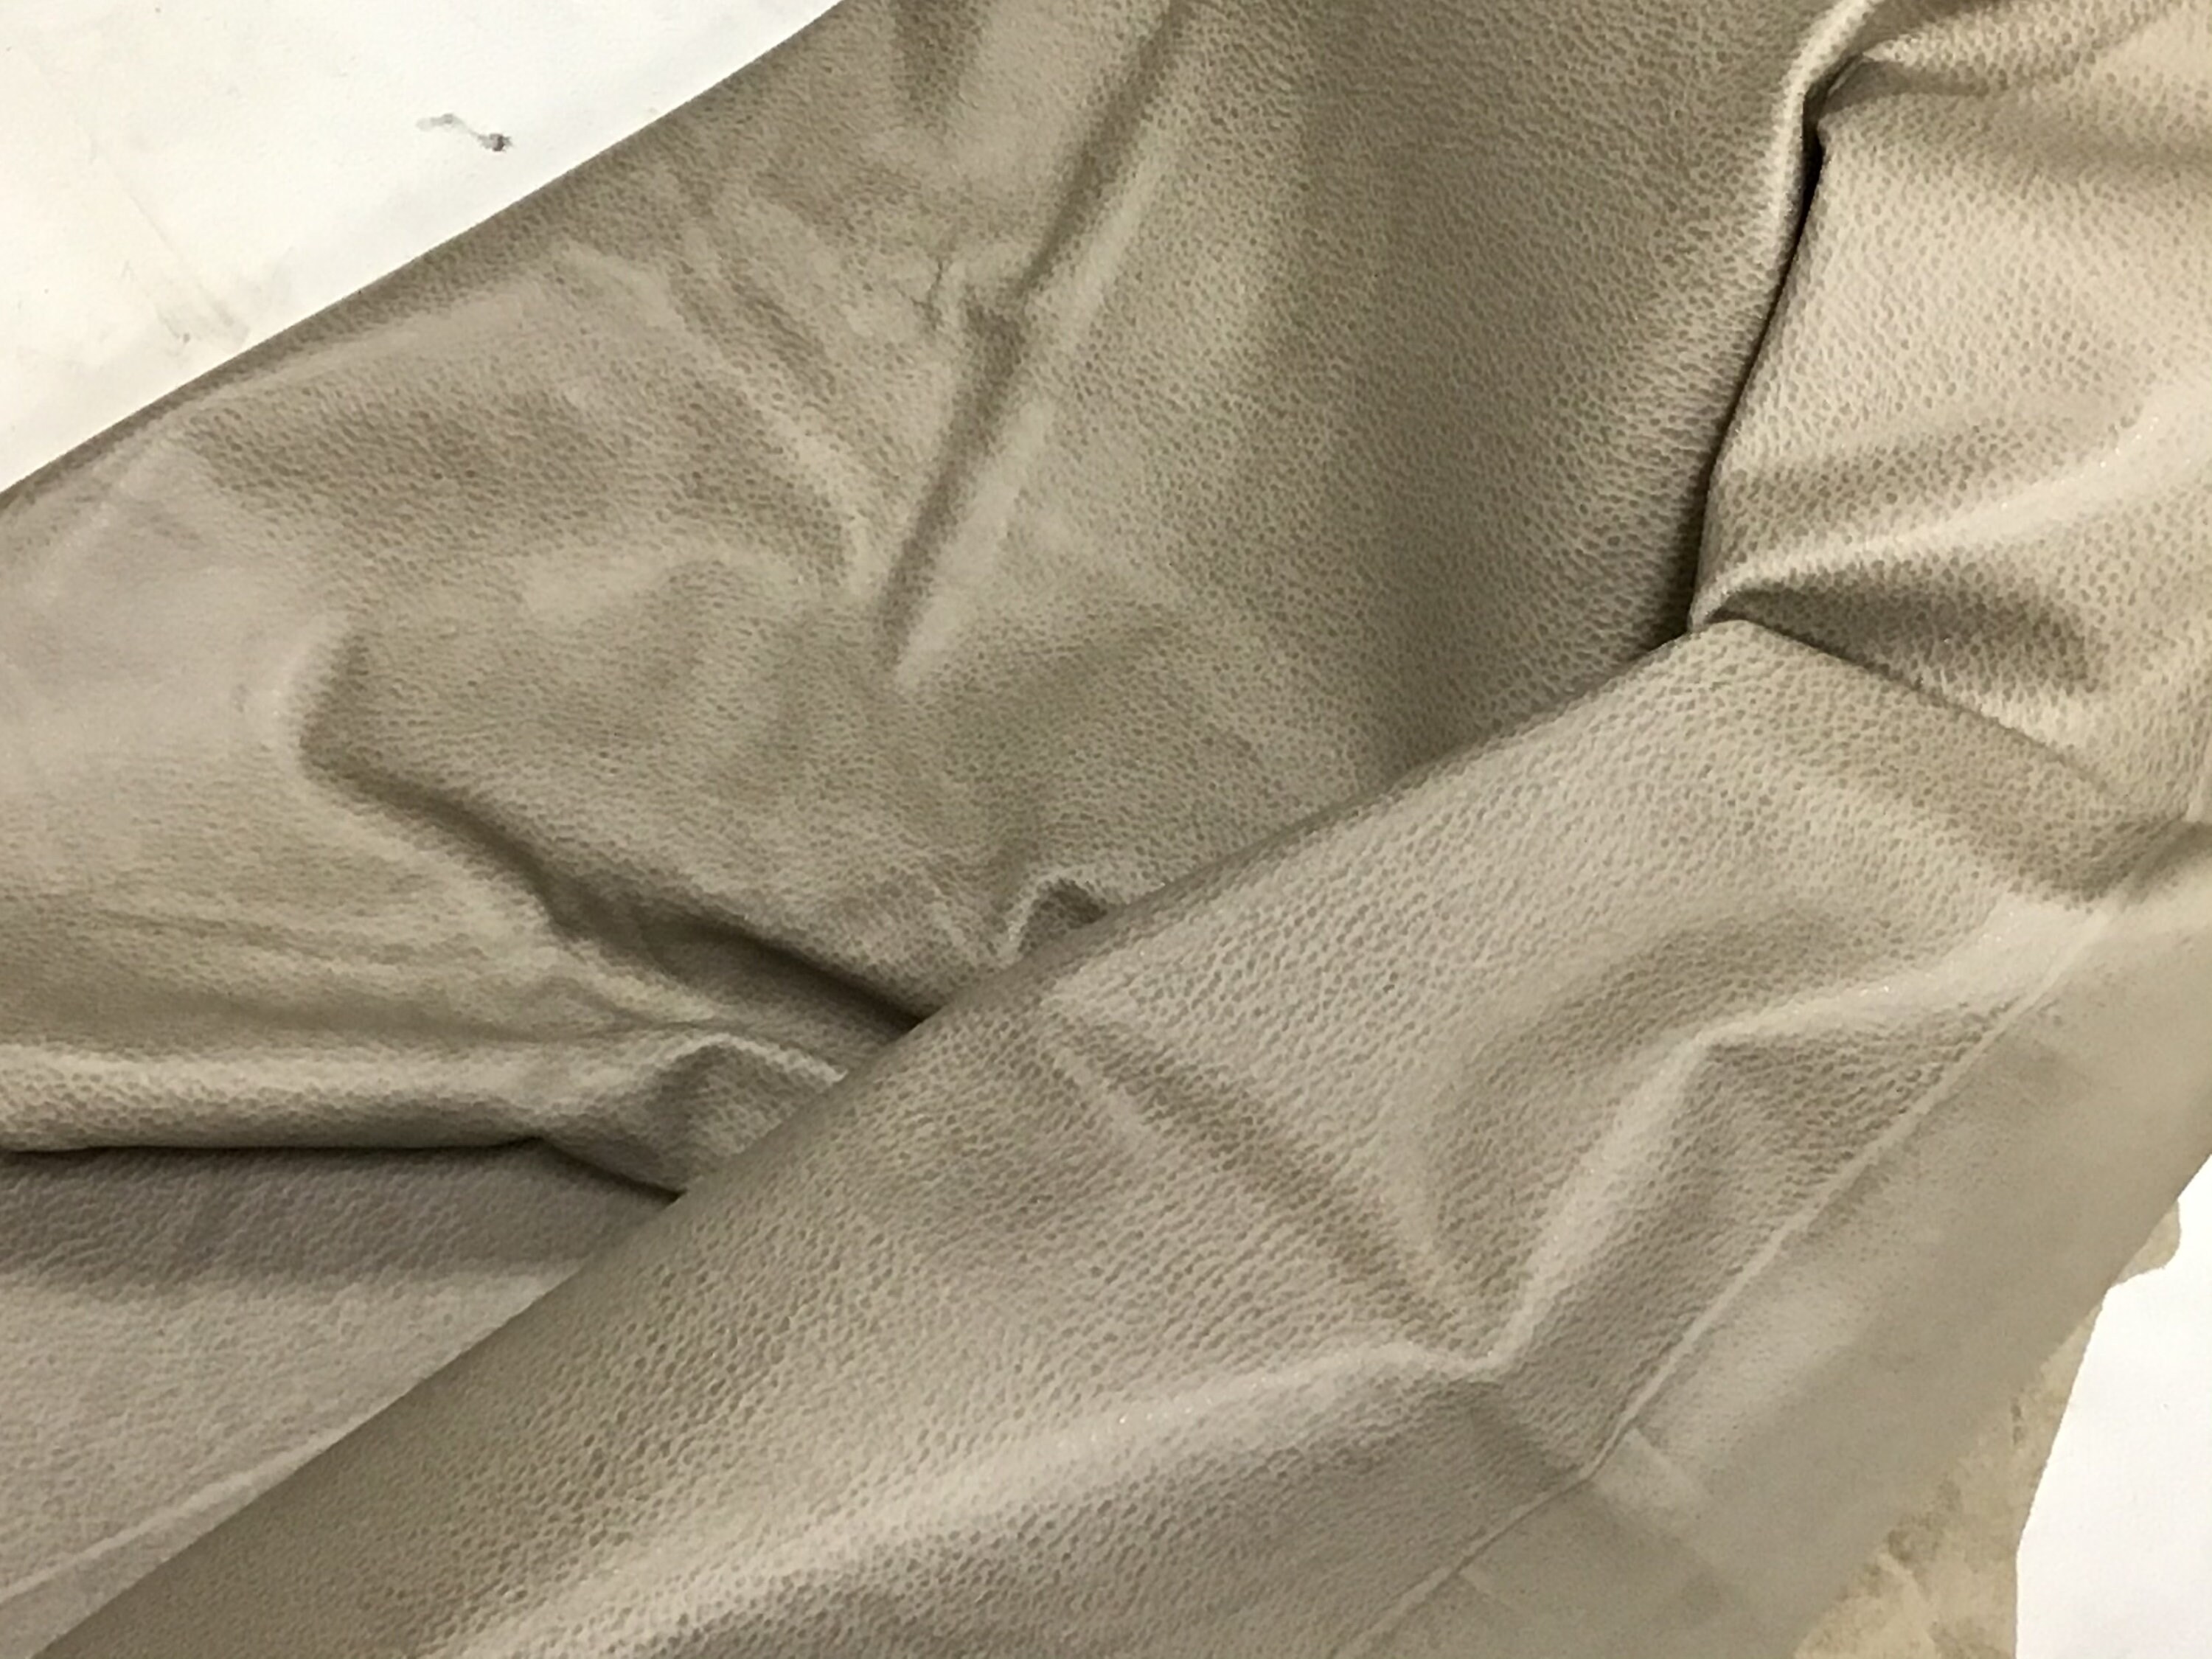 Caramel Embossed Leather, Upholstery Leather for Coverings and Furniture  Restorations, Car Seat Upholstery, Pebble Cowhides for Crafts 